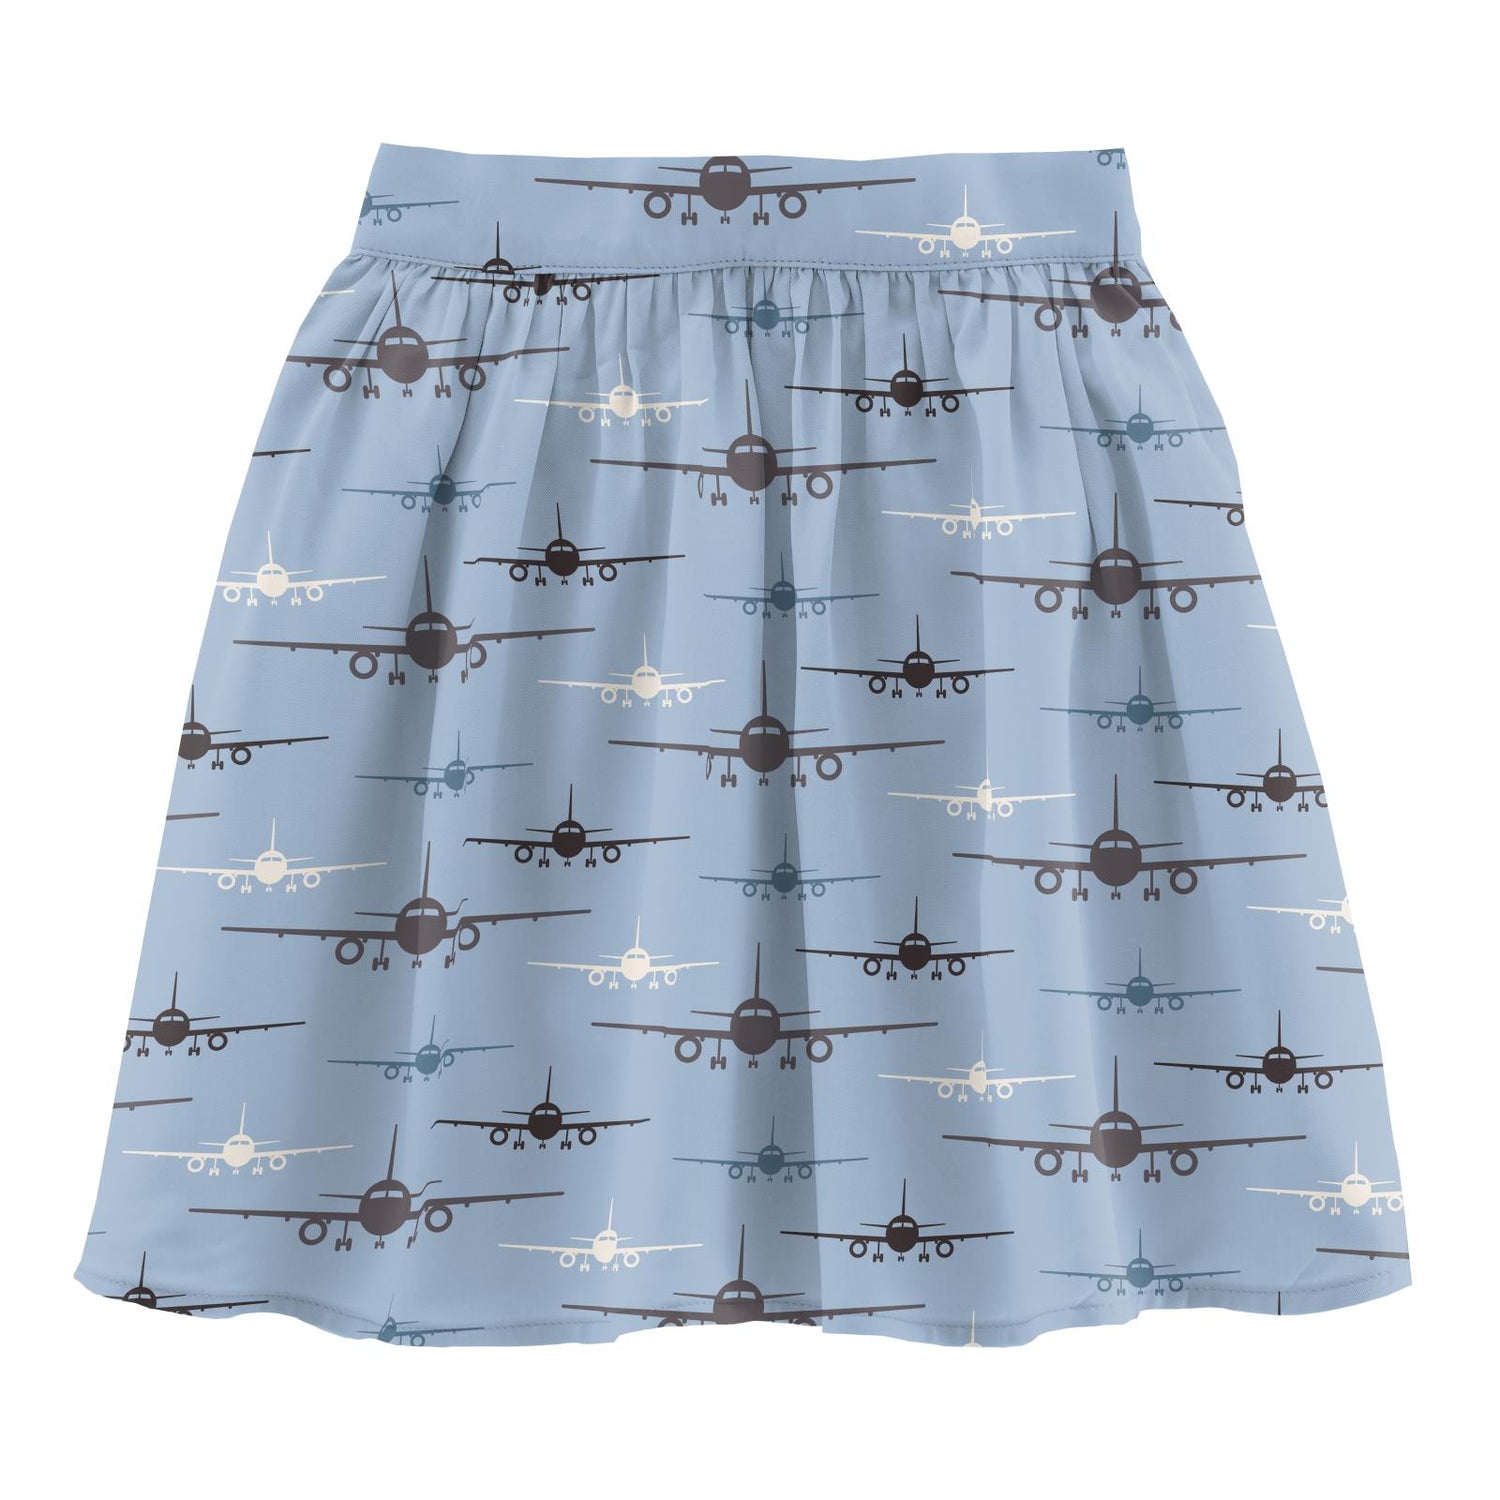 Print Woven Skirt in Pond Airplanes